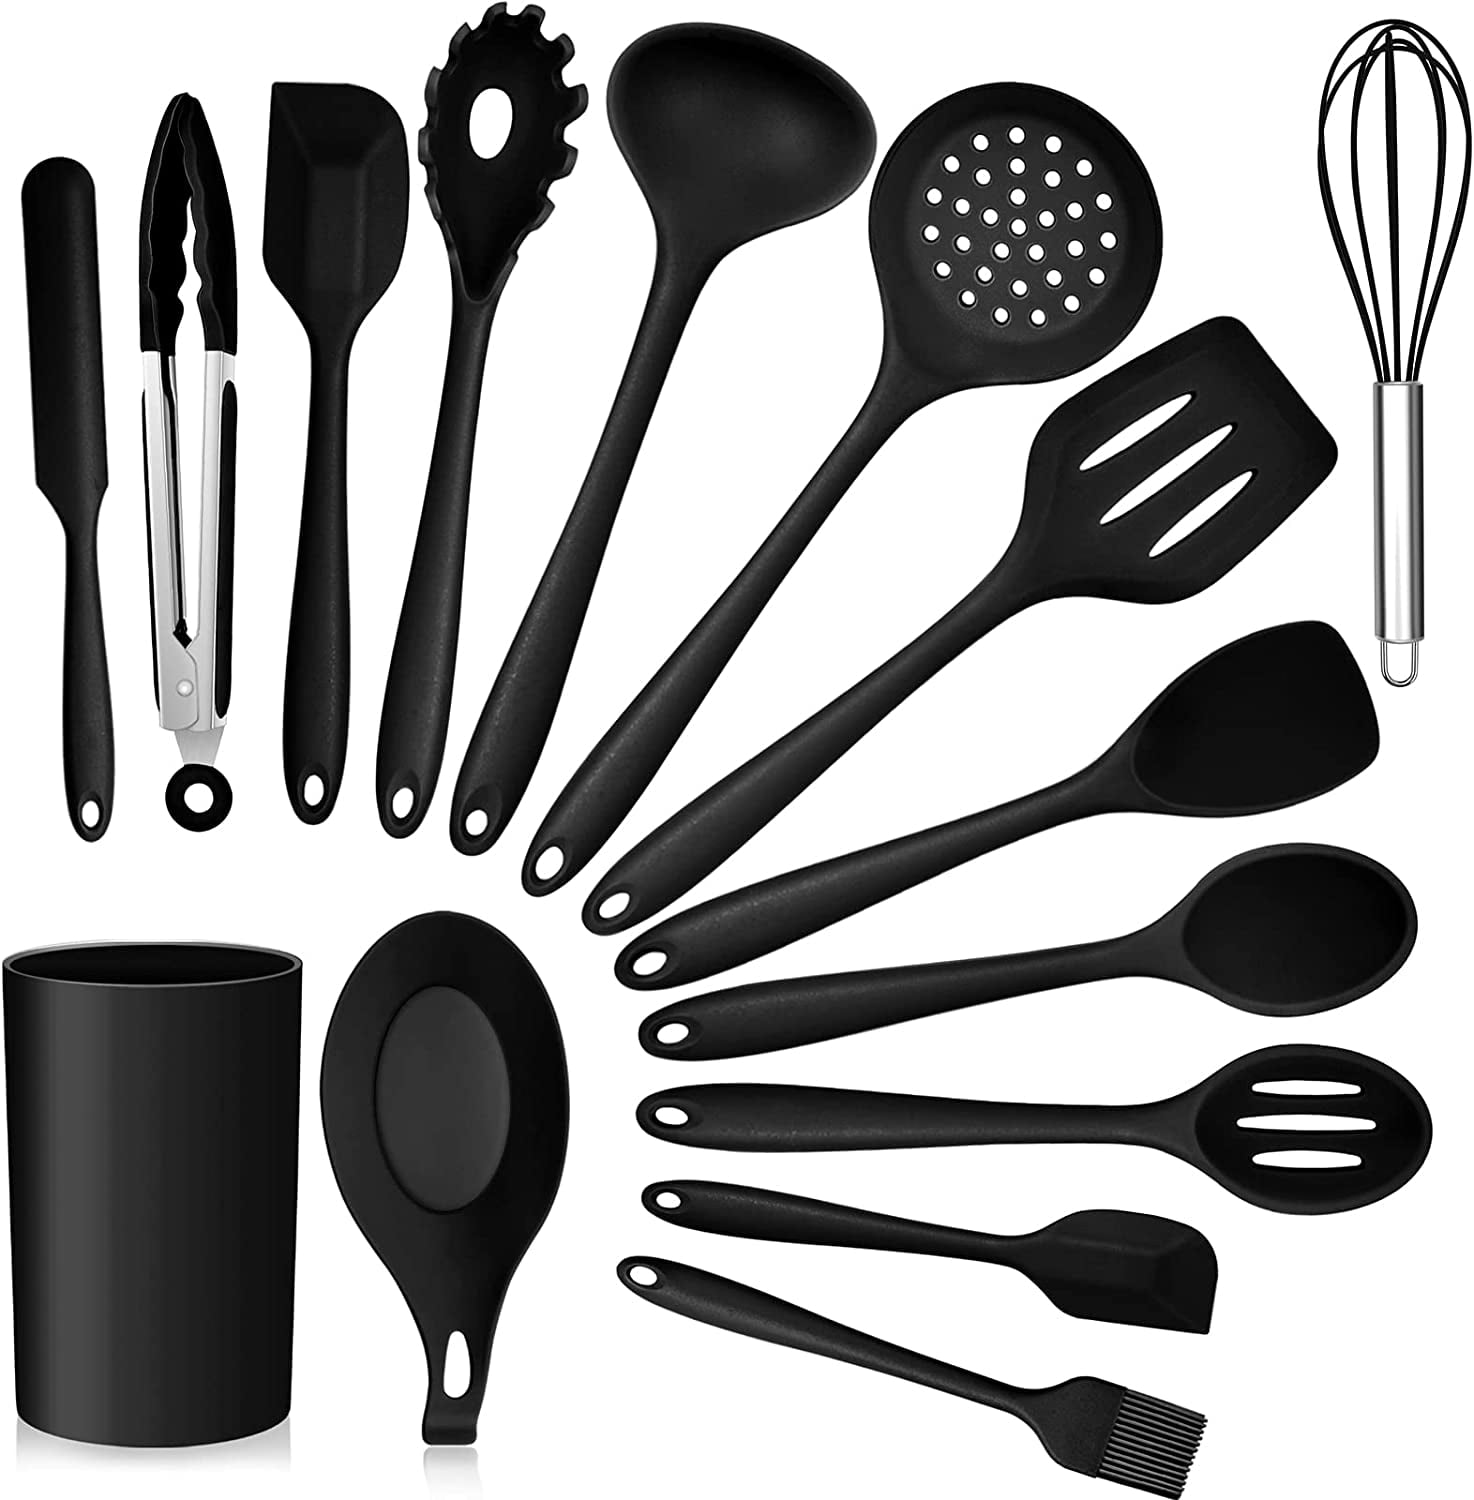 Set of 5, Made in USA, Quality Black Kitchen Utensils